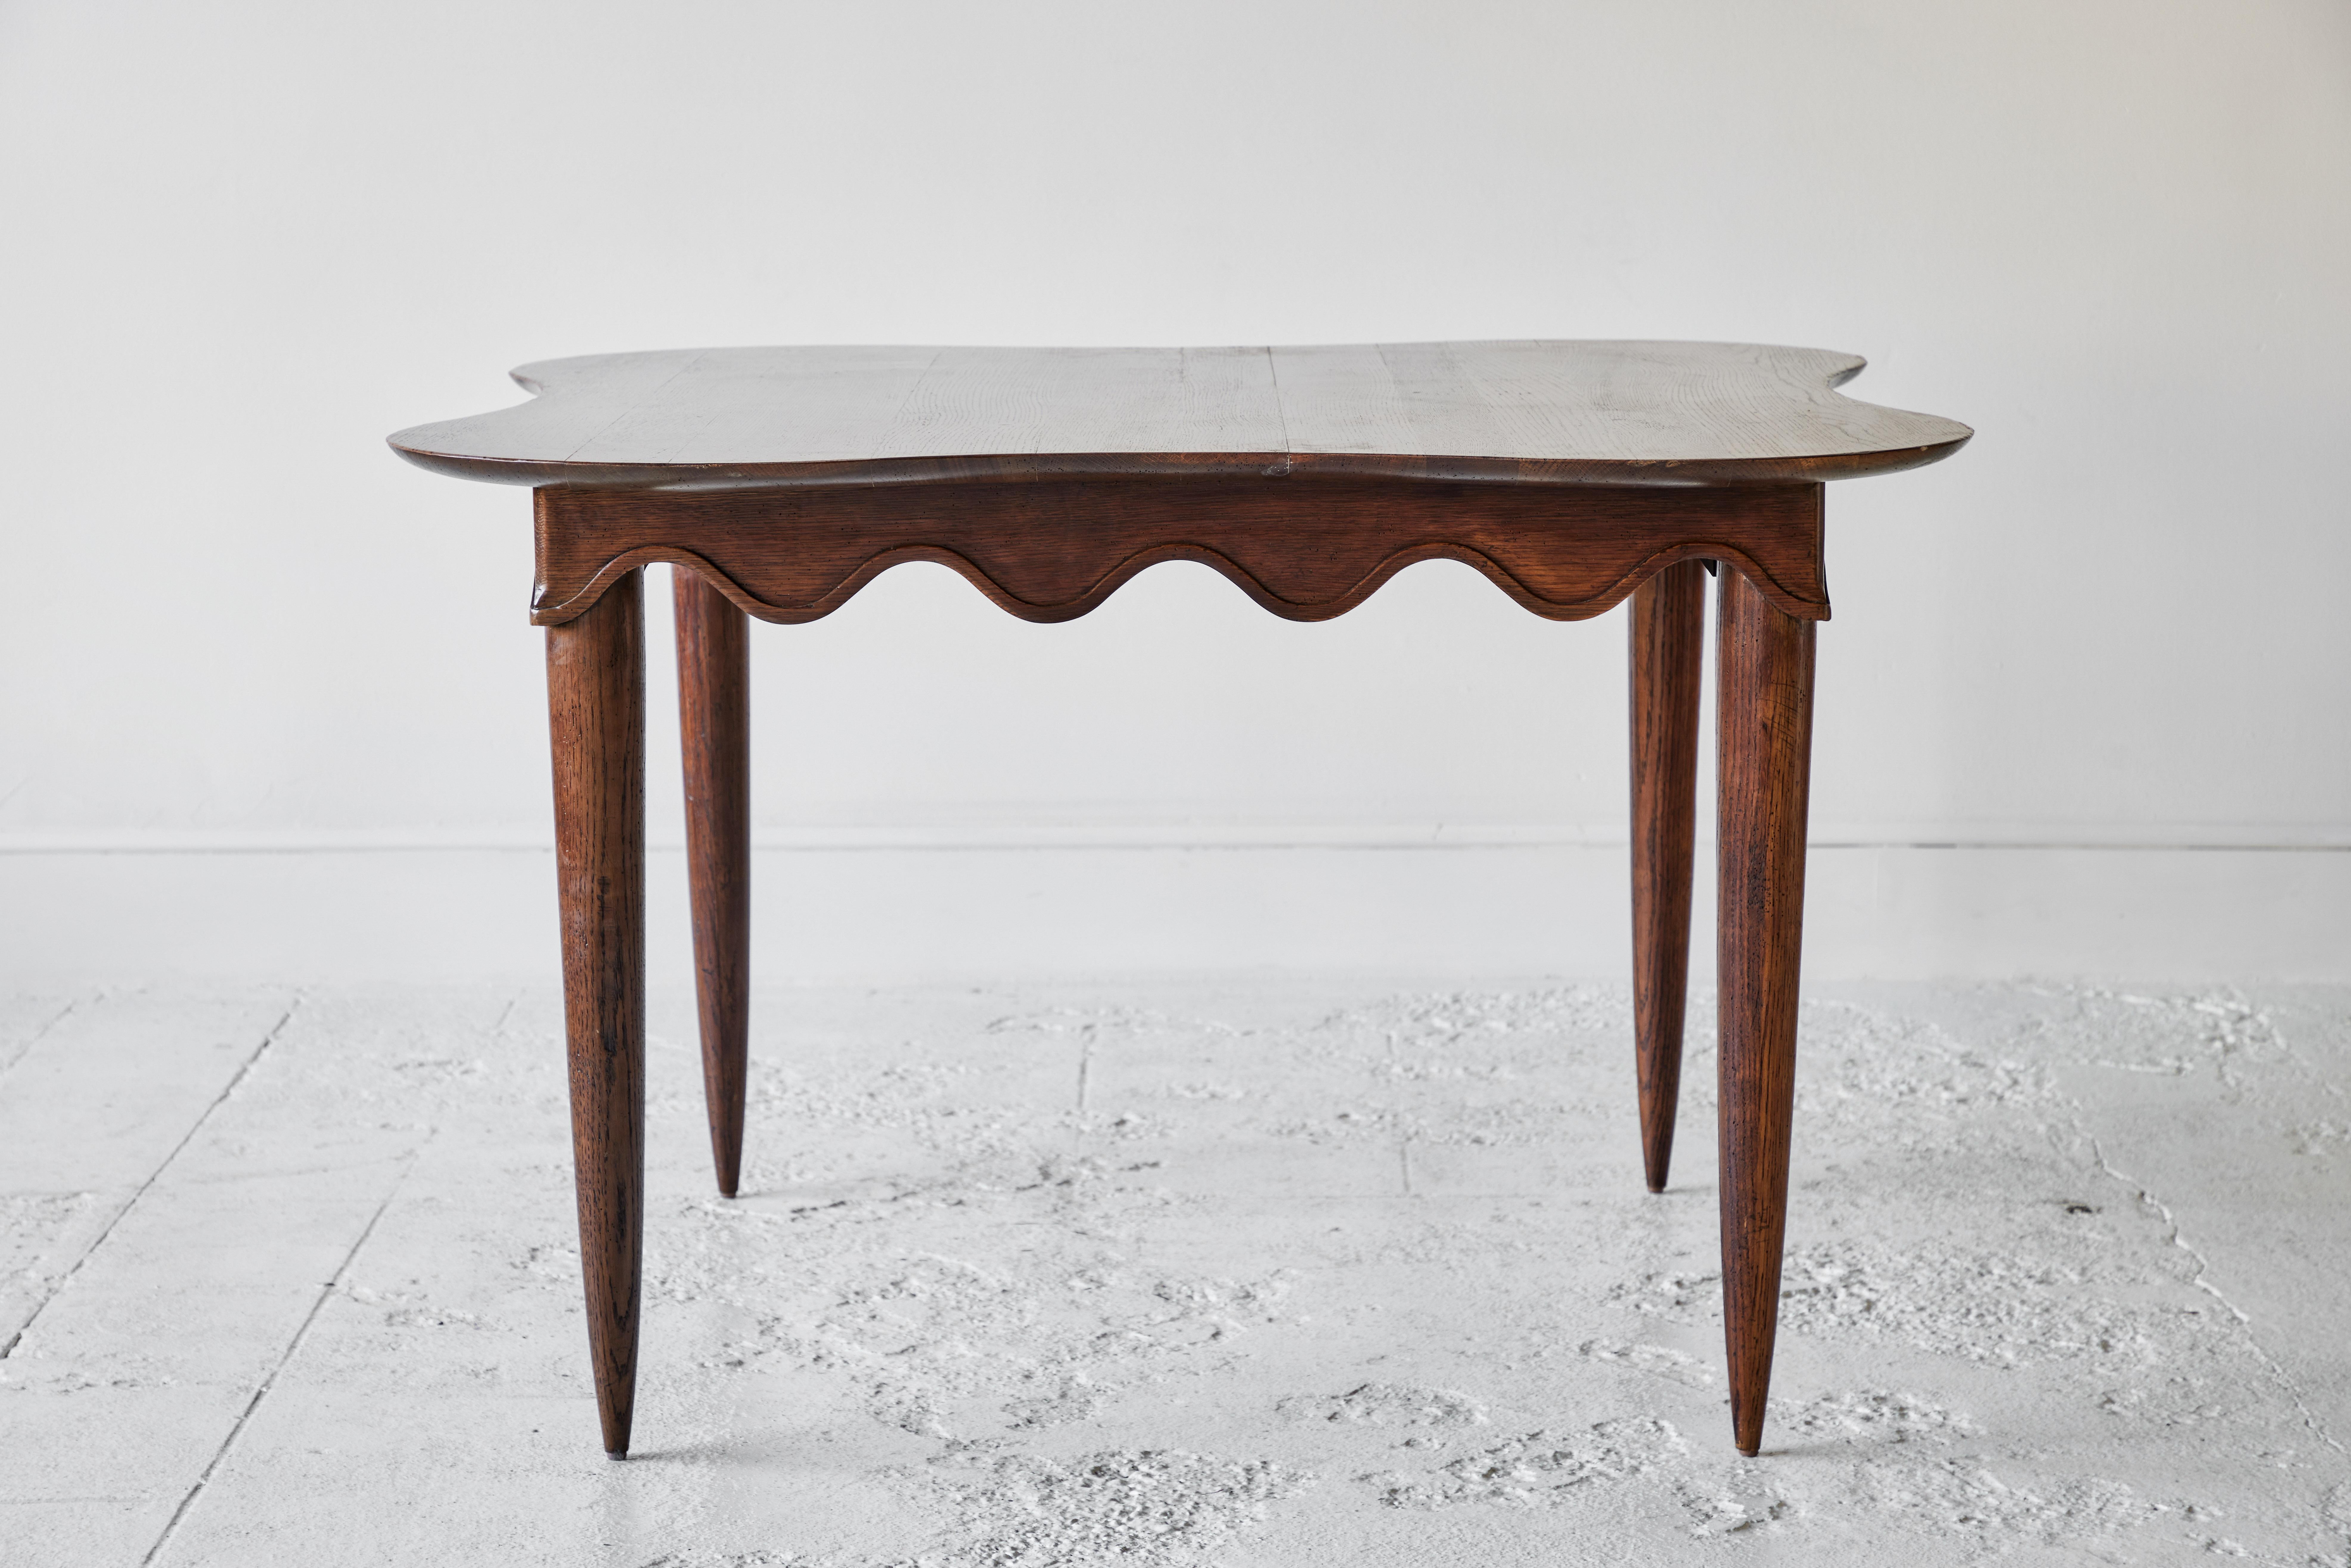 Midcentury dining table with scalloped apron and tapered legs.